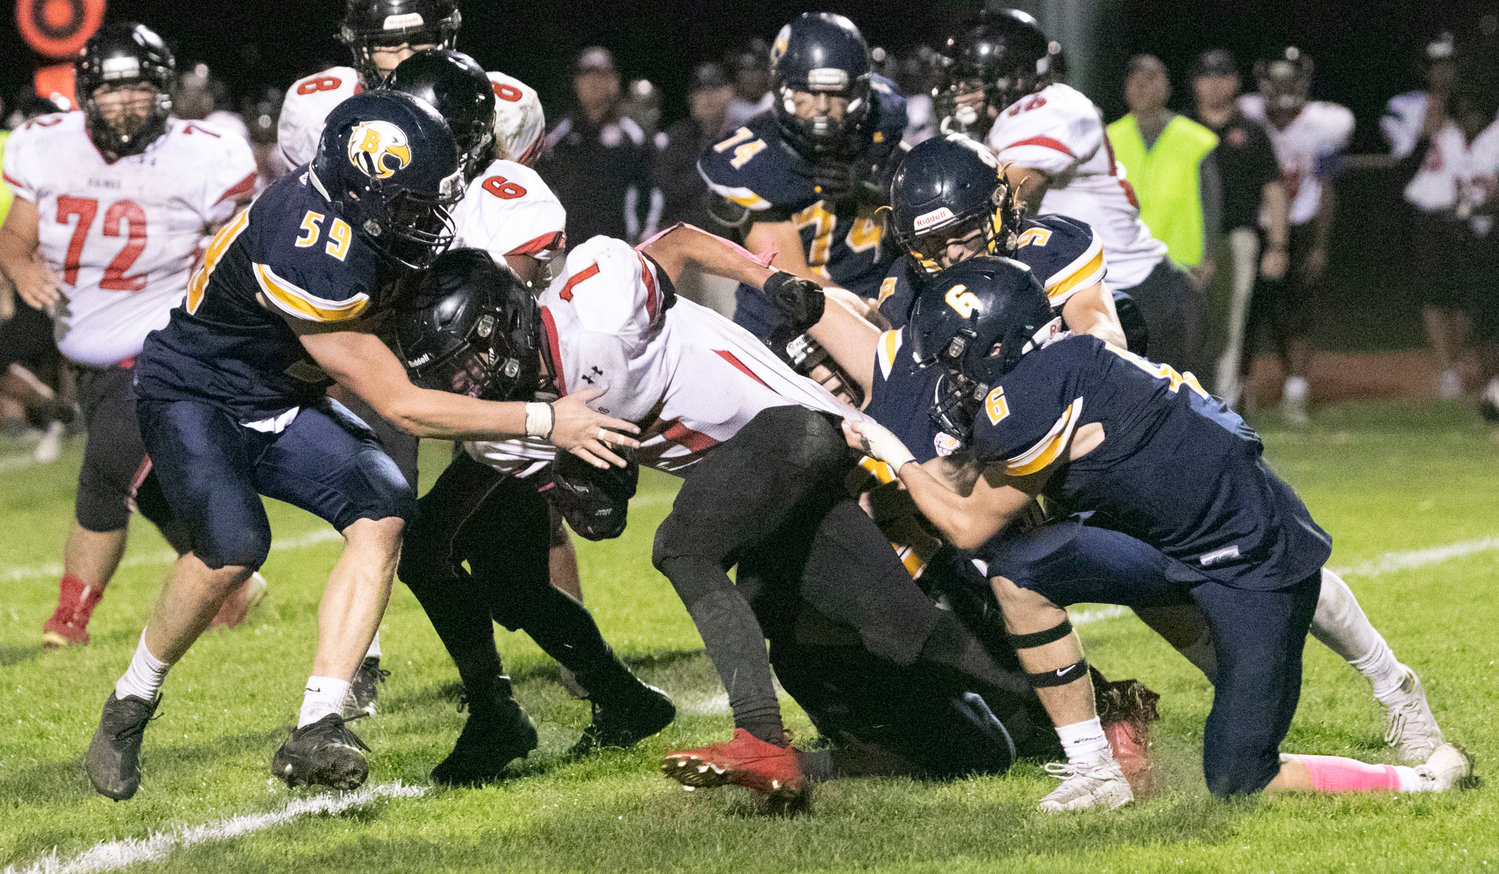 Barrington's Braeden Flaherty (6) and Will DiGiacomo (59) bring down a Rogers running back on Friday night.